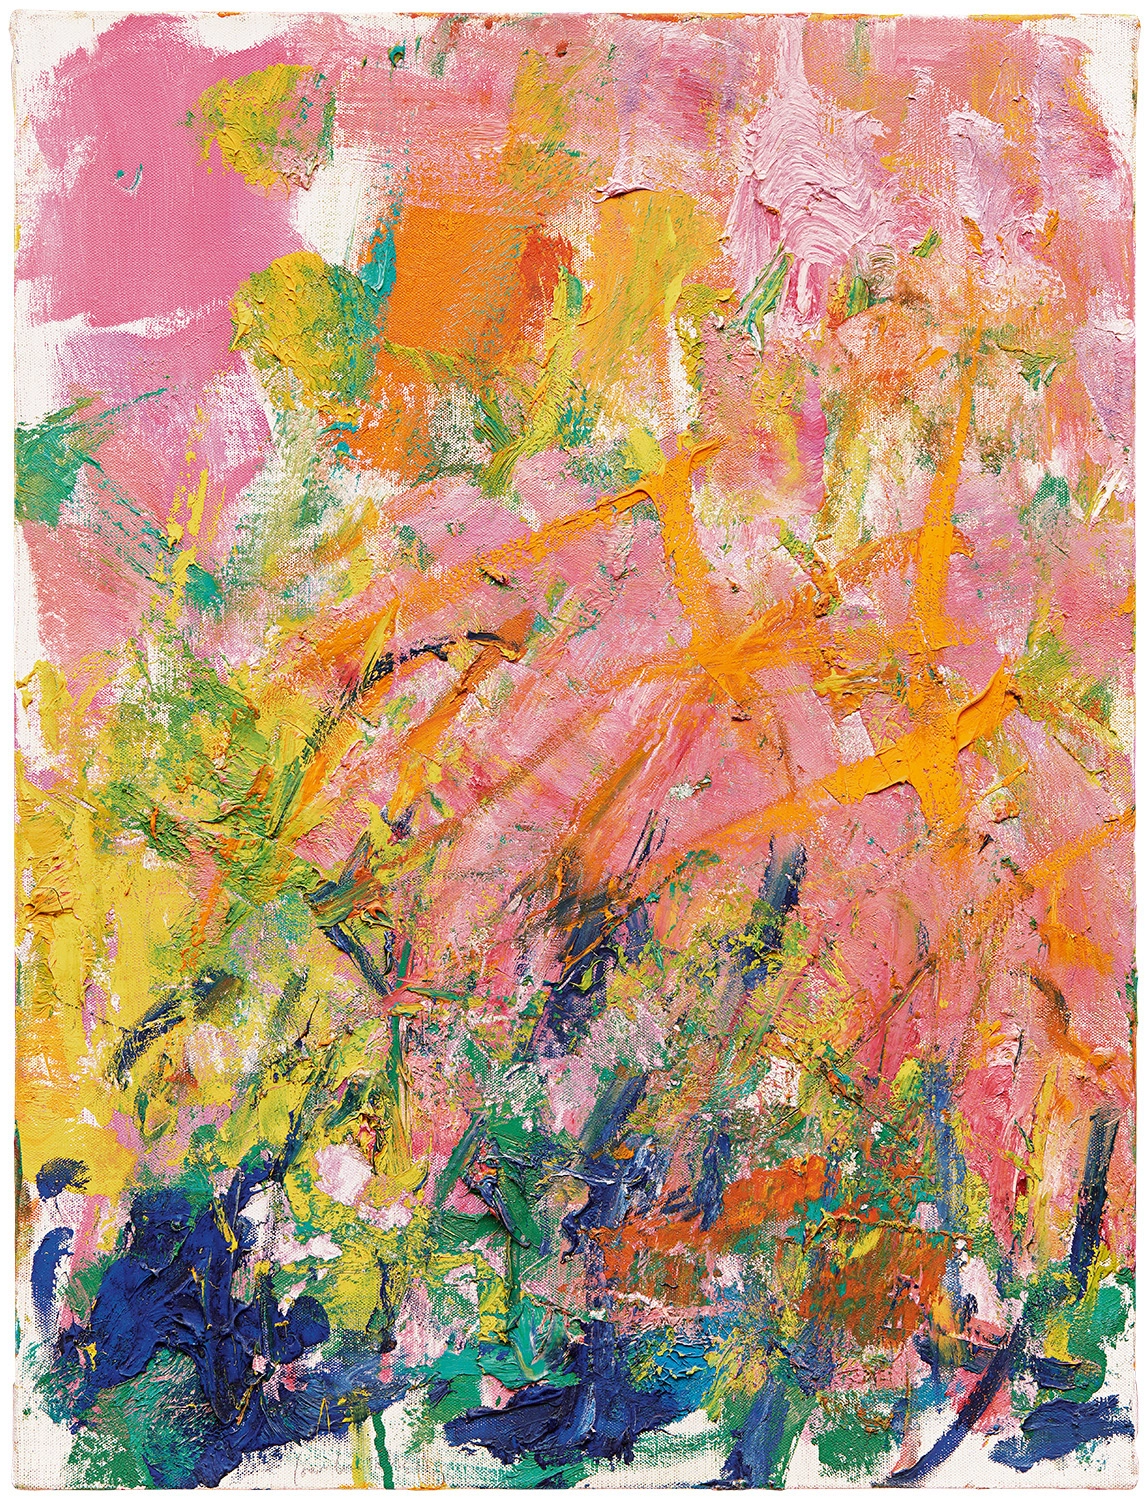 Joan Mitchell, Petit Matin (1982). Photo by Ian Lefebvre; private collection; ©estate of Joan Mitchell.